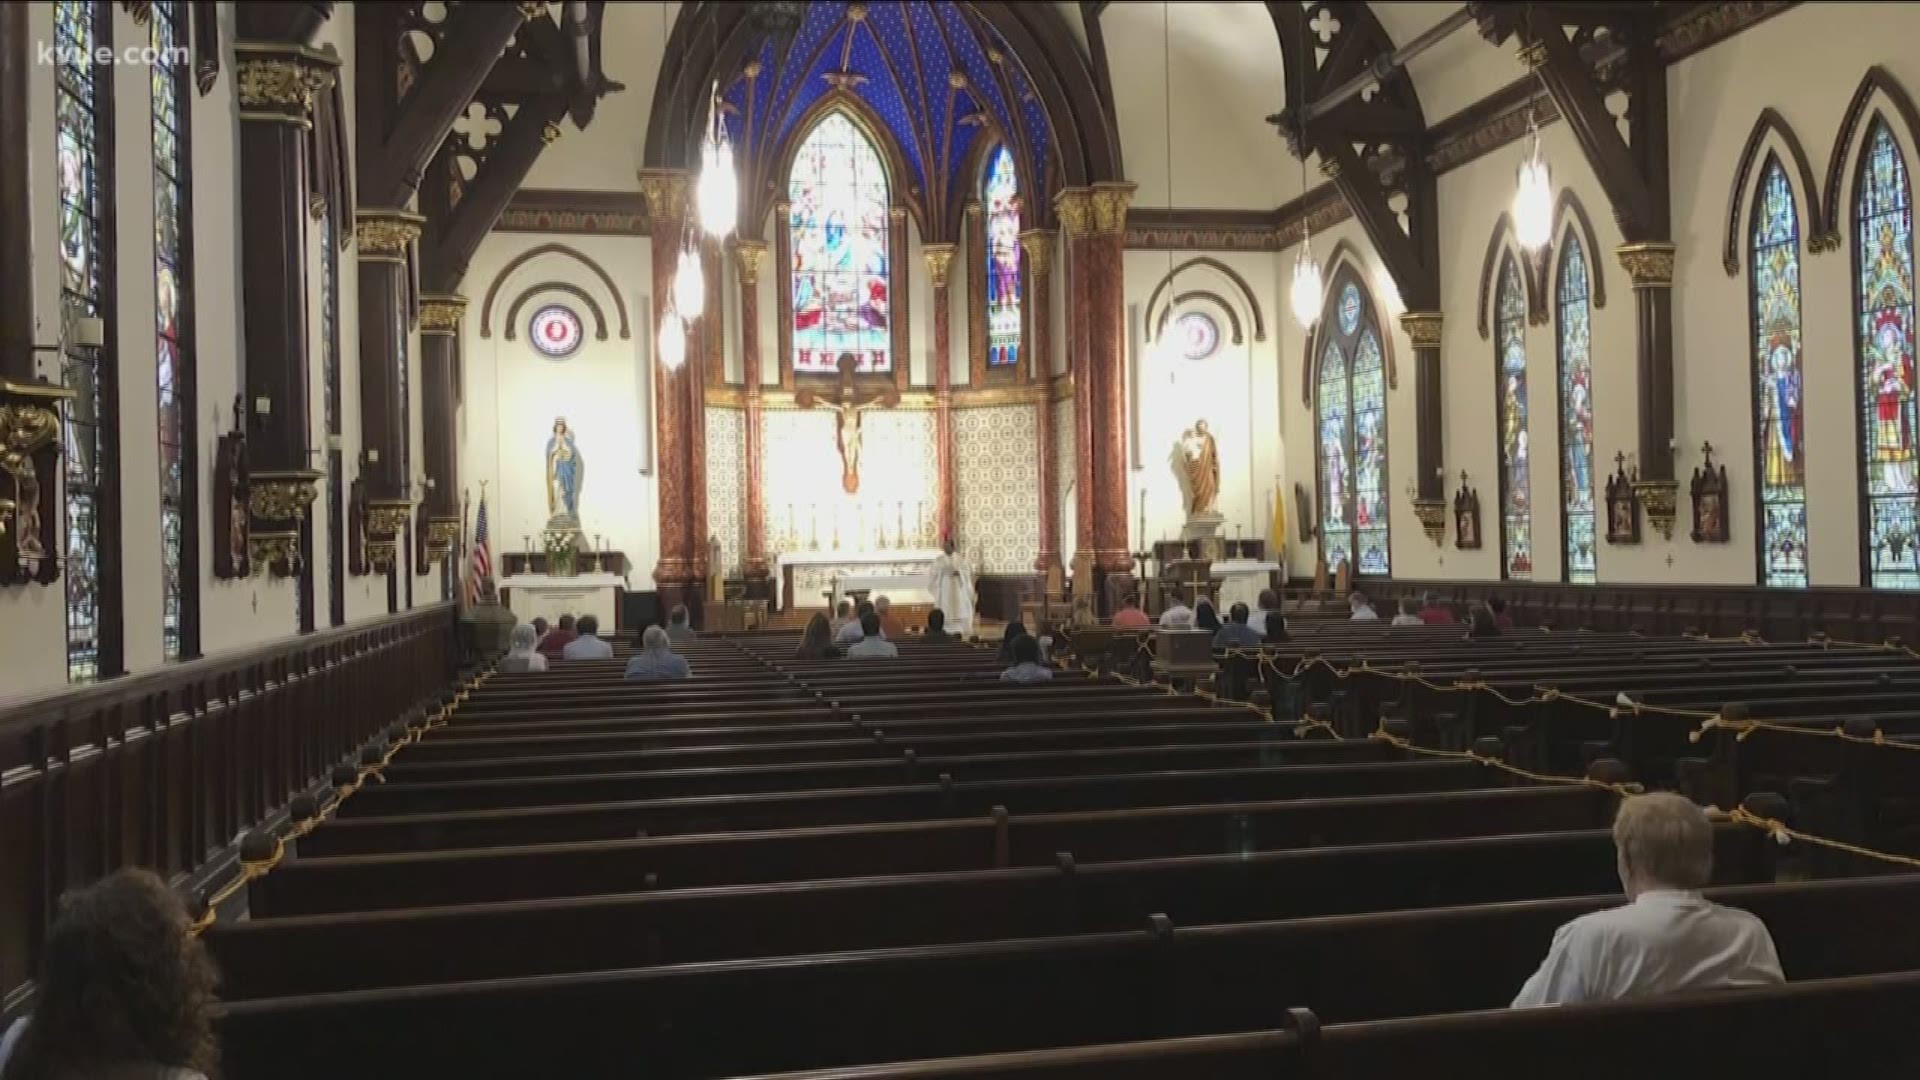 Austin-area Catholic churches started holding Mass today with up to 25% occupancy.